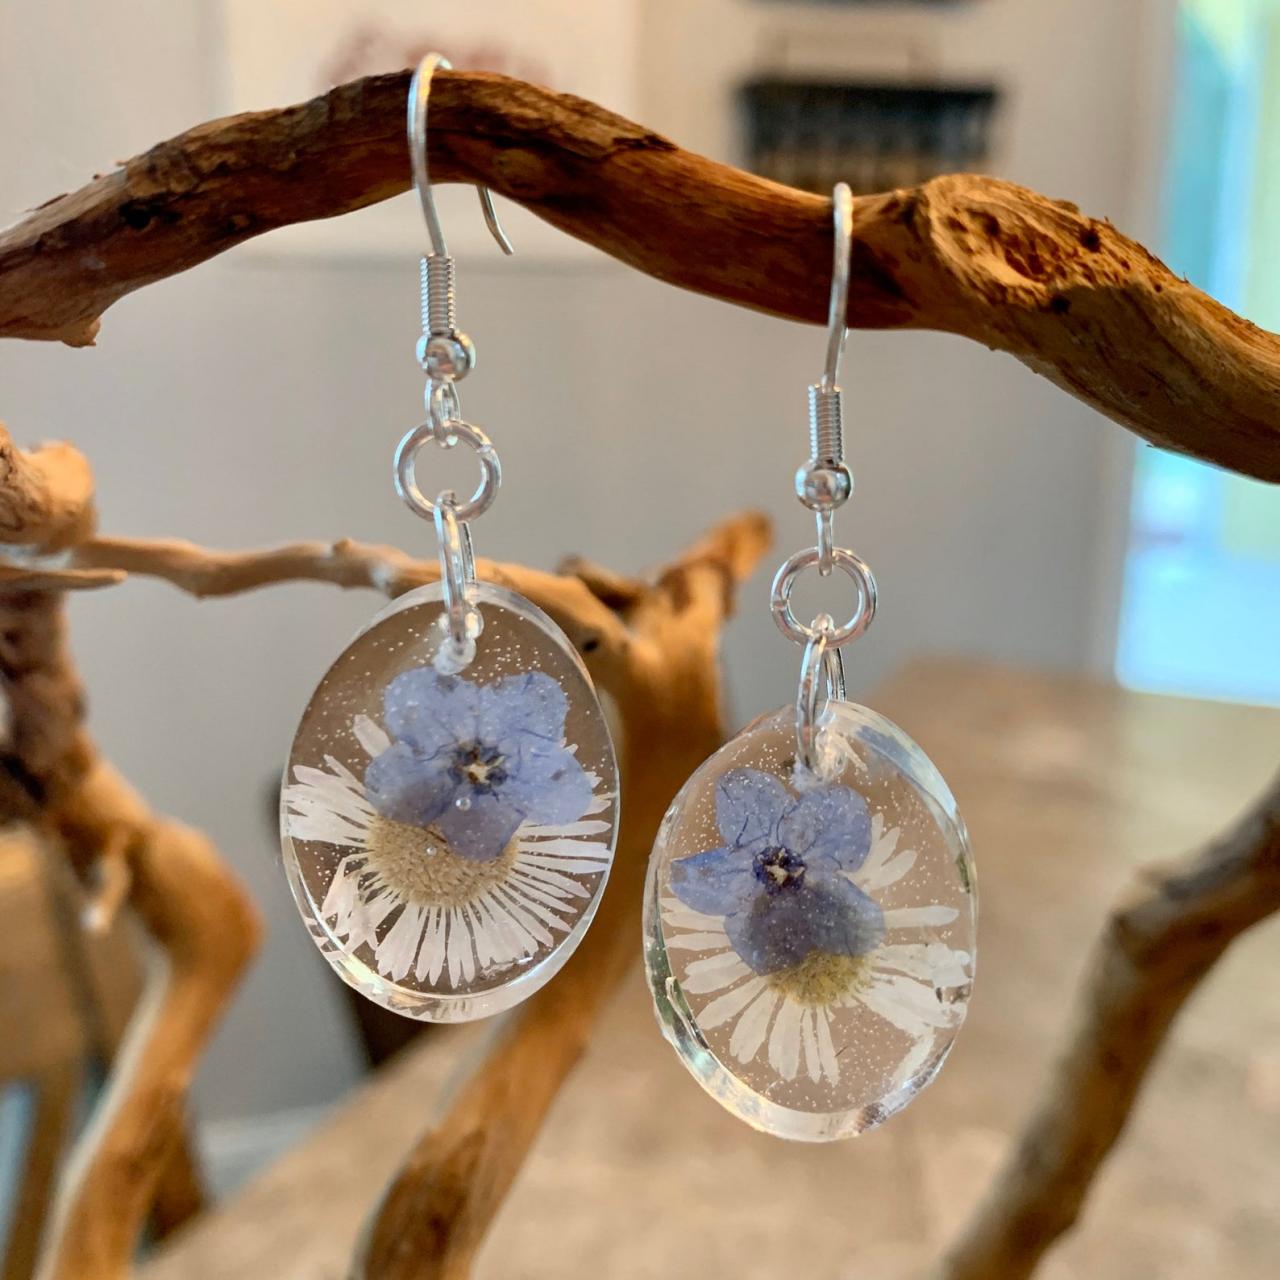 Pressed Flowers Earrings, Resin Flower Jewelry, Unique Gift For Grad,preserved Flowers, Boho, Minimalist Jewelry Gifts, Daisy Forget Me Not